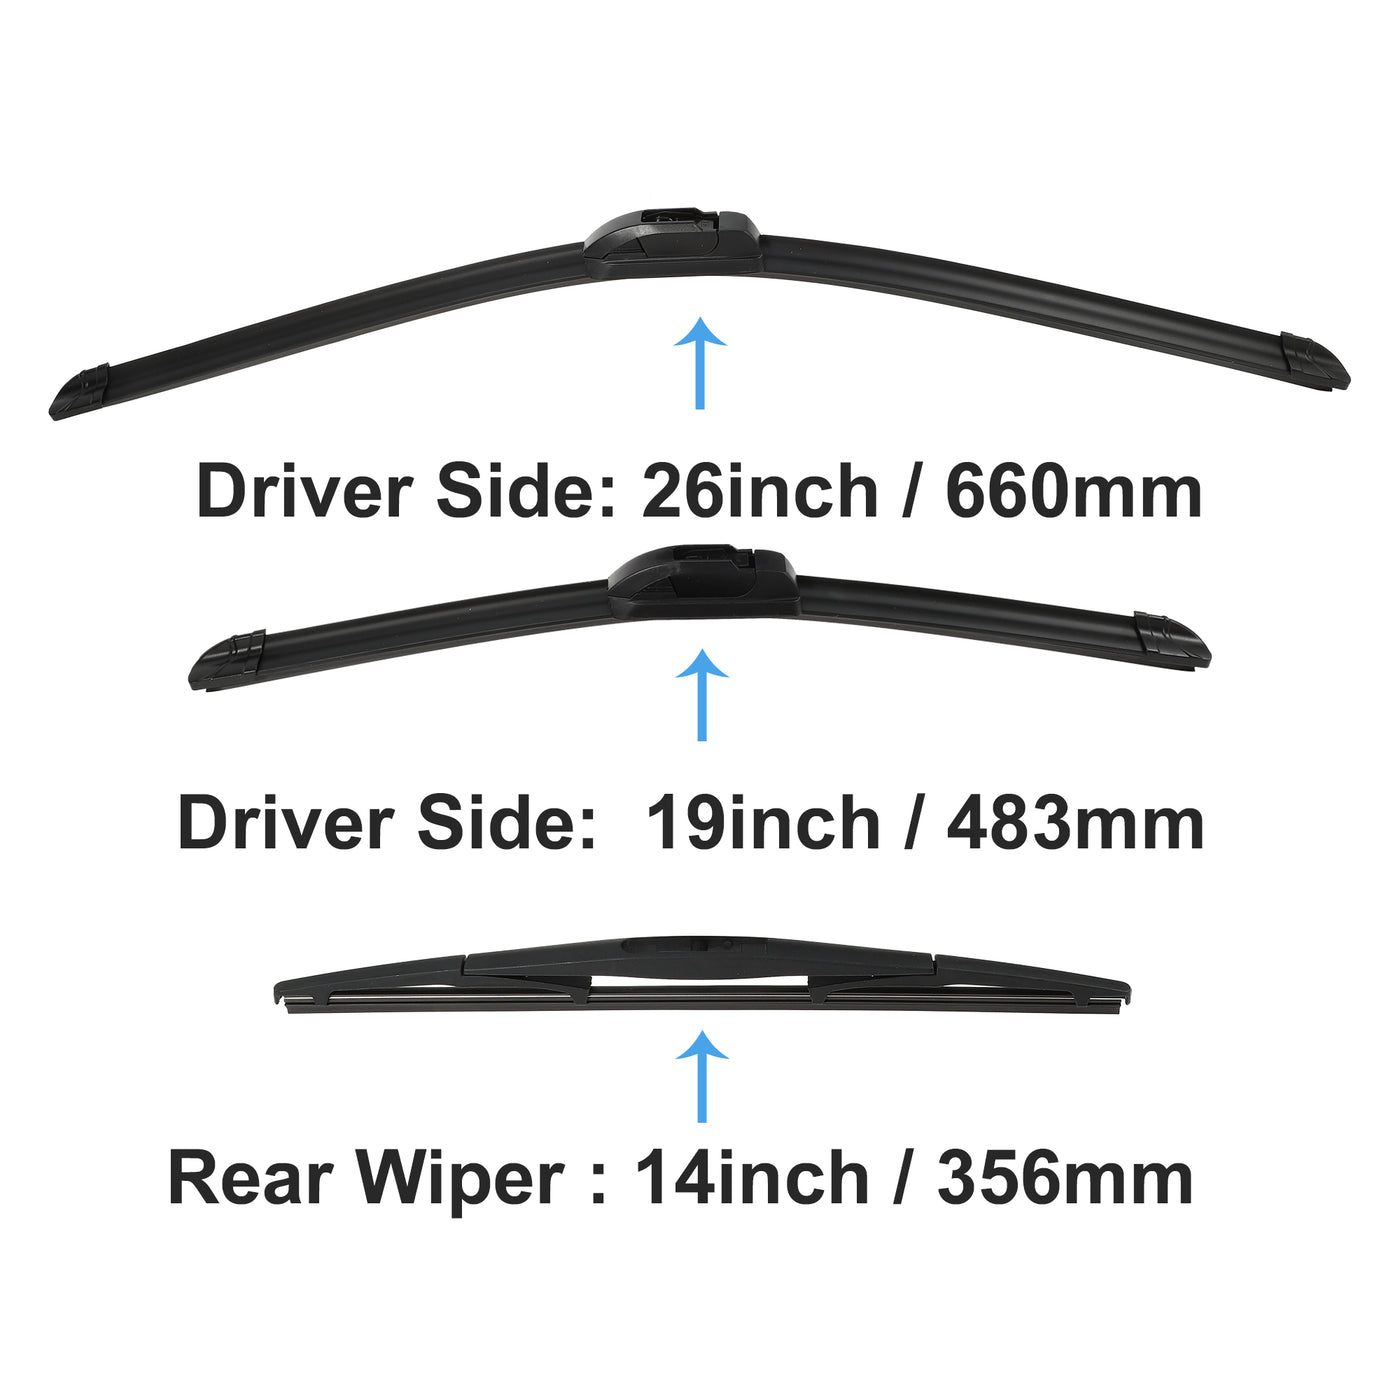 ACROPIX Front Rear Windshield Wiper Blade Set Car Wiper Blade Fit for Subaru Outback Legacy 2010-2014 - Pack of 3 Black